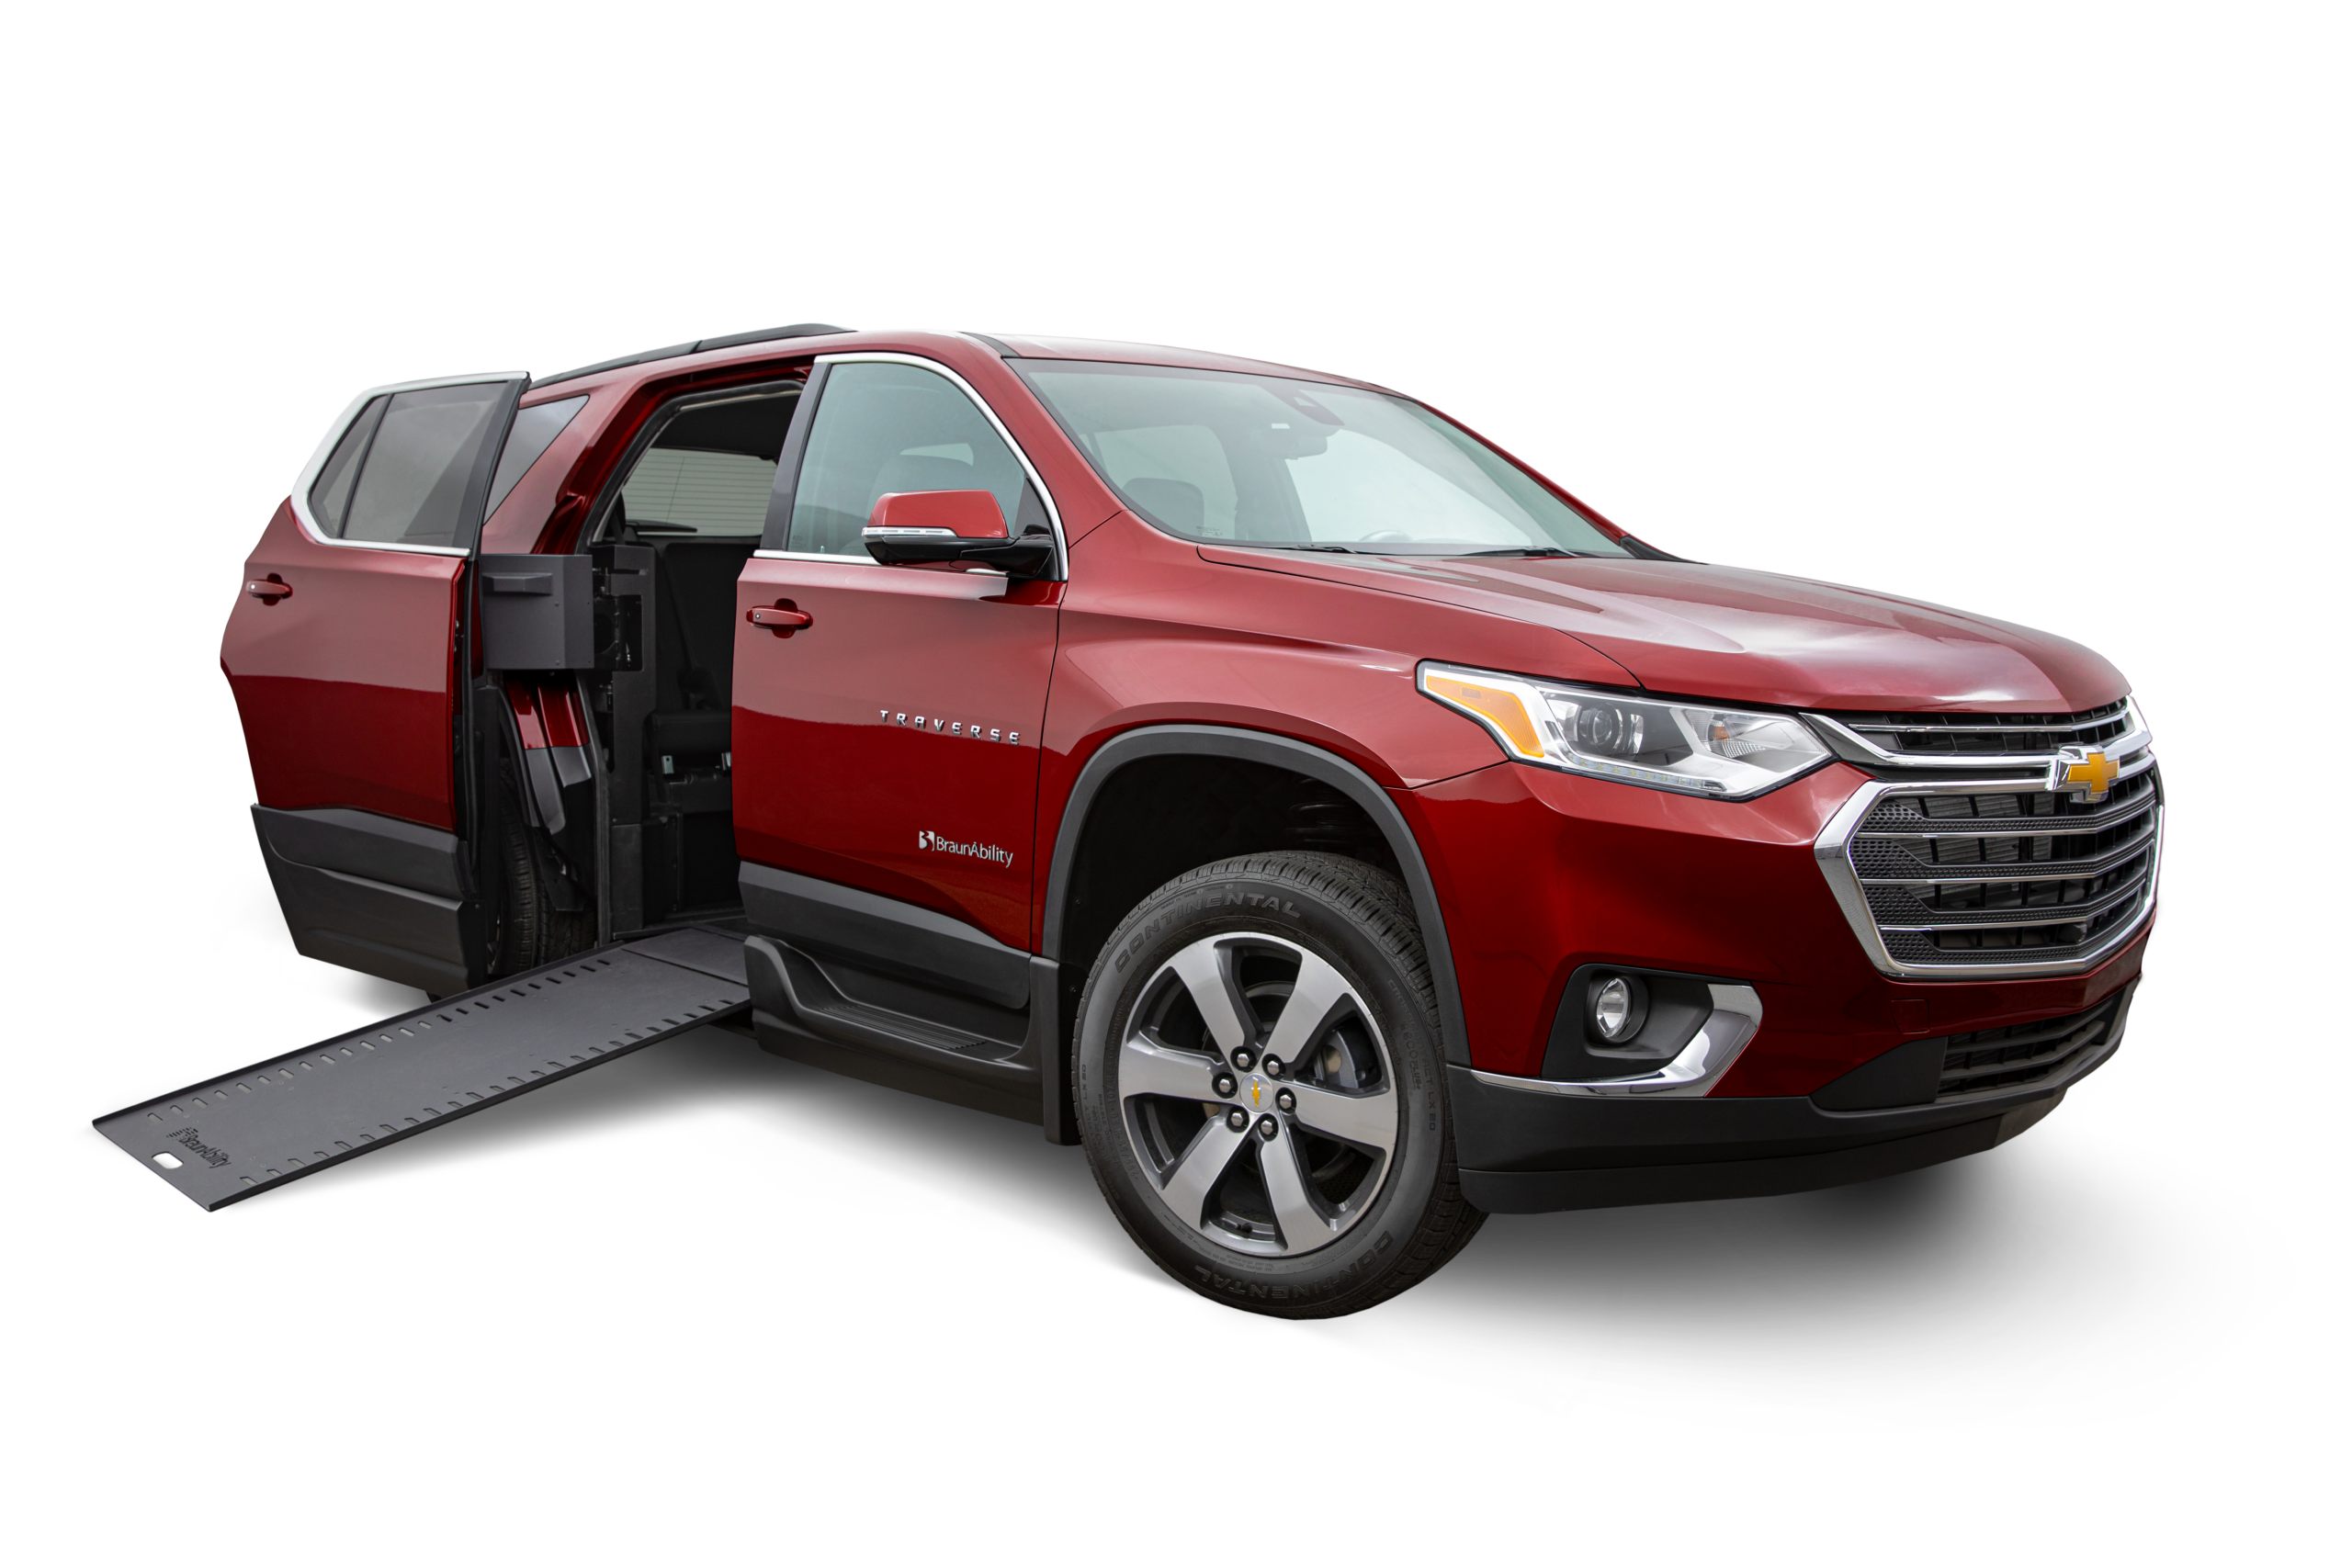 2023 Radiant Red Chevy Traverse 3LT with BraunAbility XI Conversion with Rubber